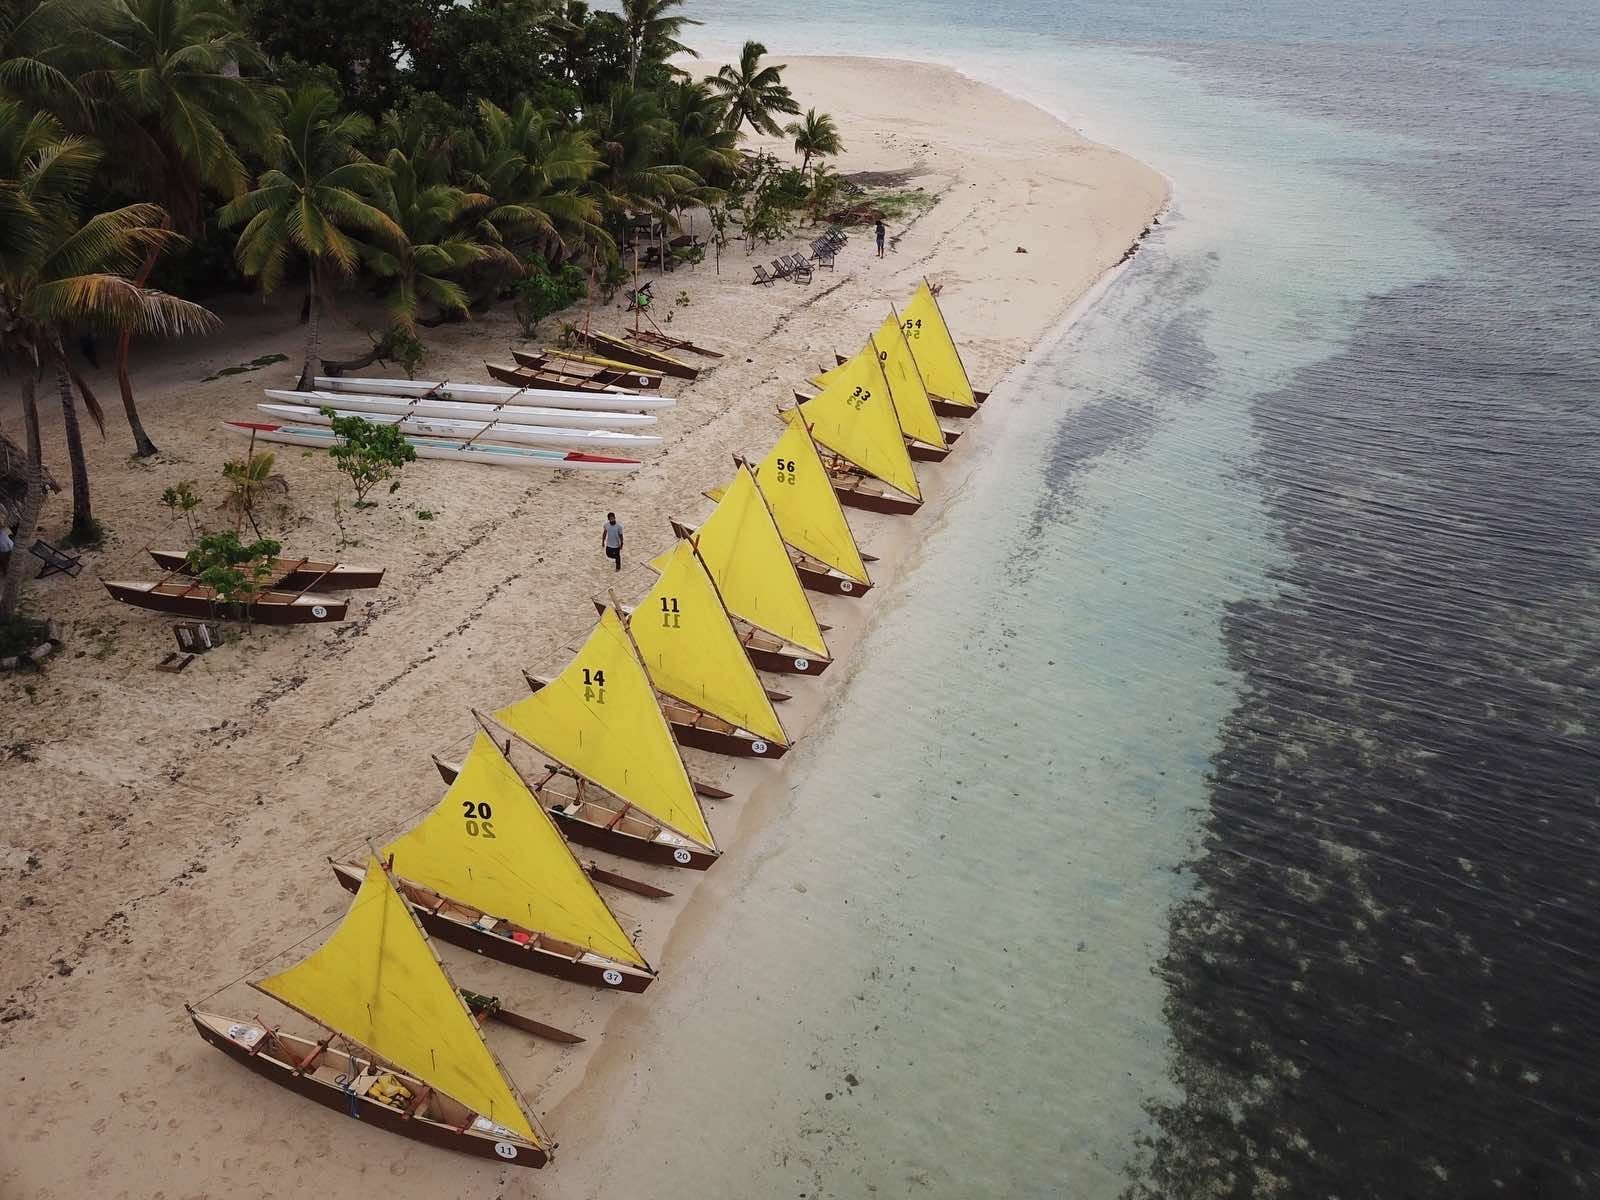 Drua canoes lined up on beach